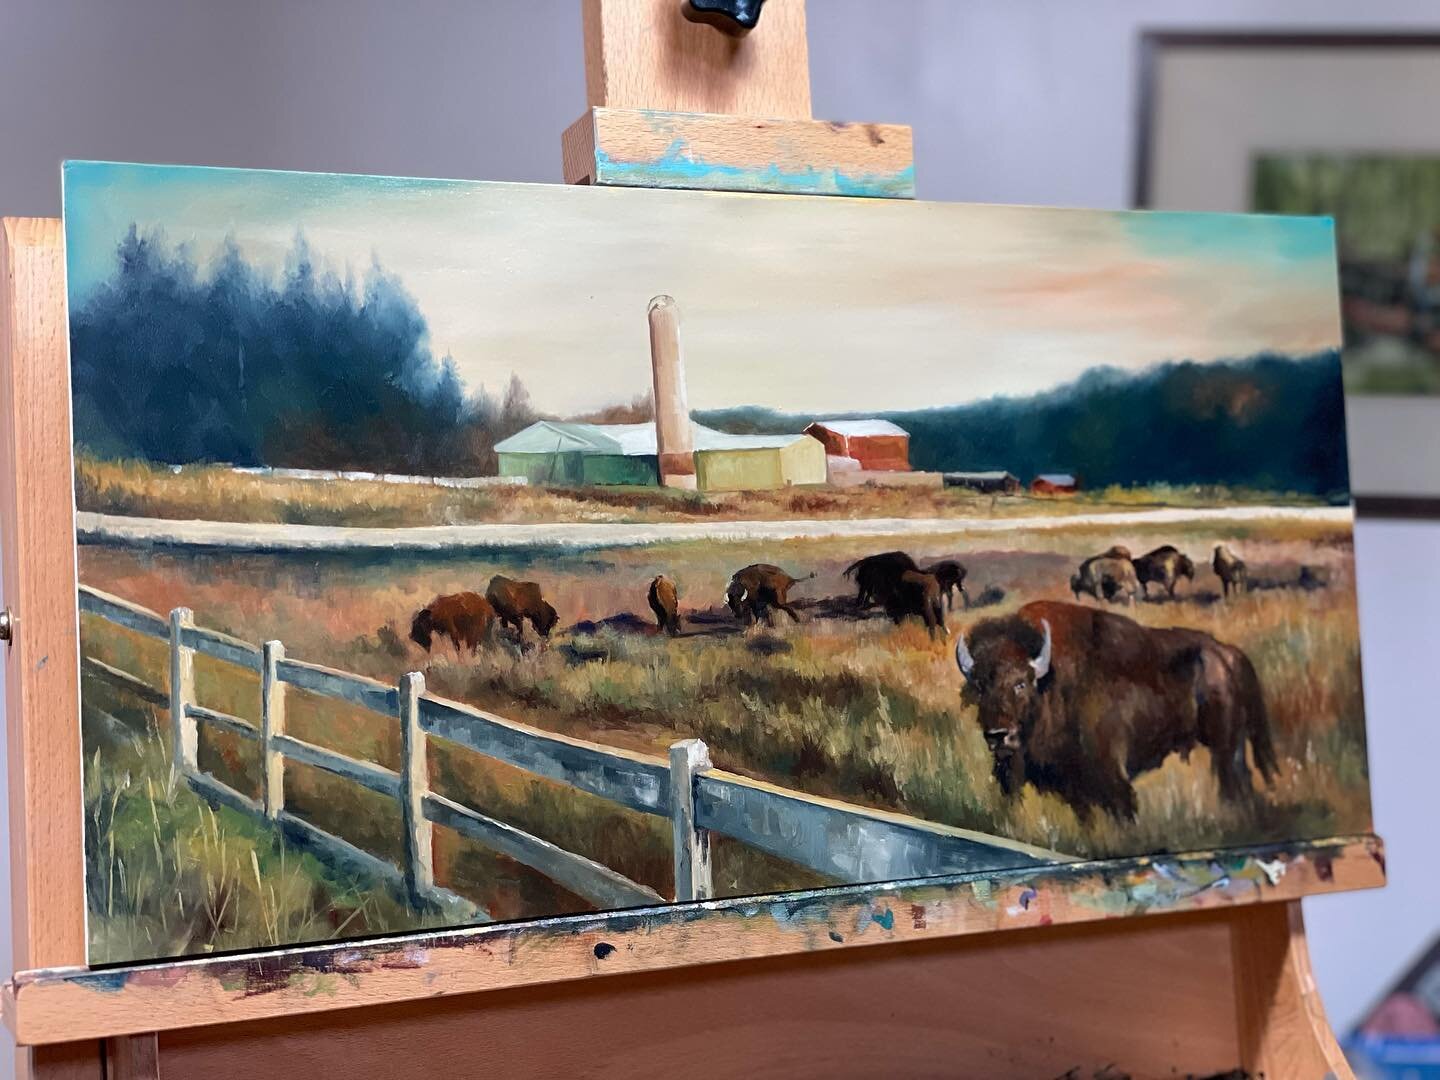 Got a little birthday painting in today! Spent the morning reliving my excitement to drive past the buffalo farm. It was one of my favorite sites as a kid. Who knows if it was beacuse of the awesome strength and beauty of those majestic animals. My l